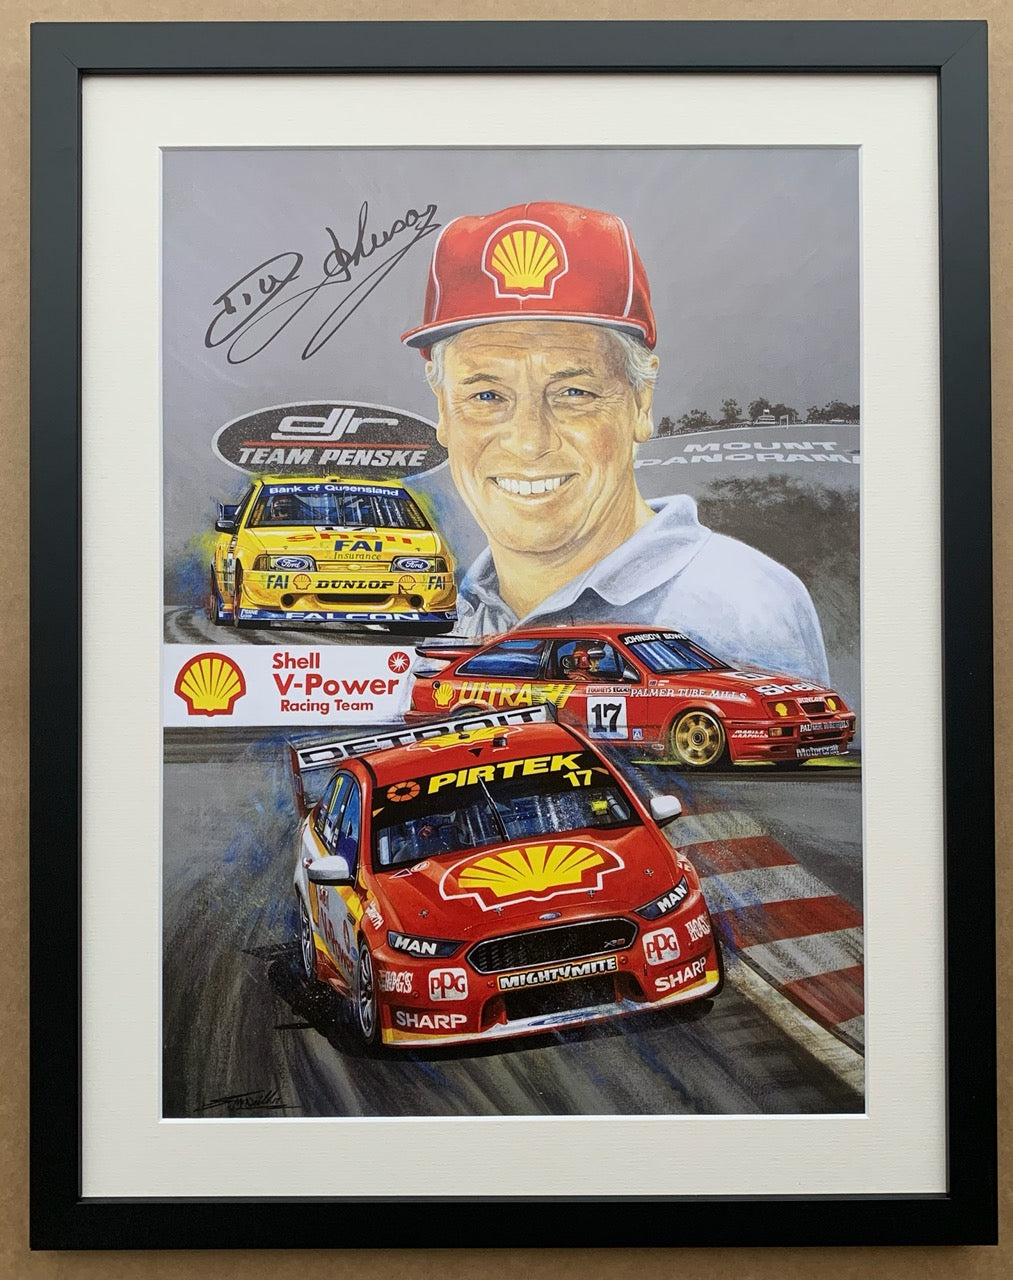 Dick Johnson and Shell - signed by Dick Johnson